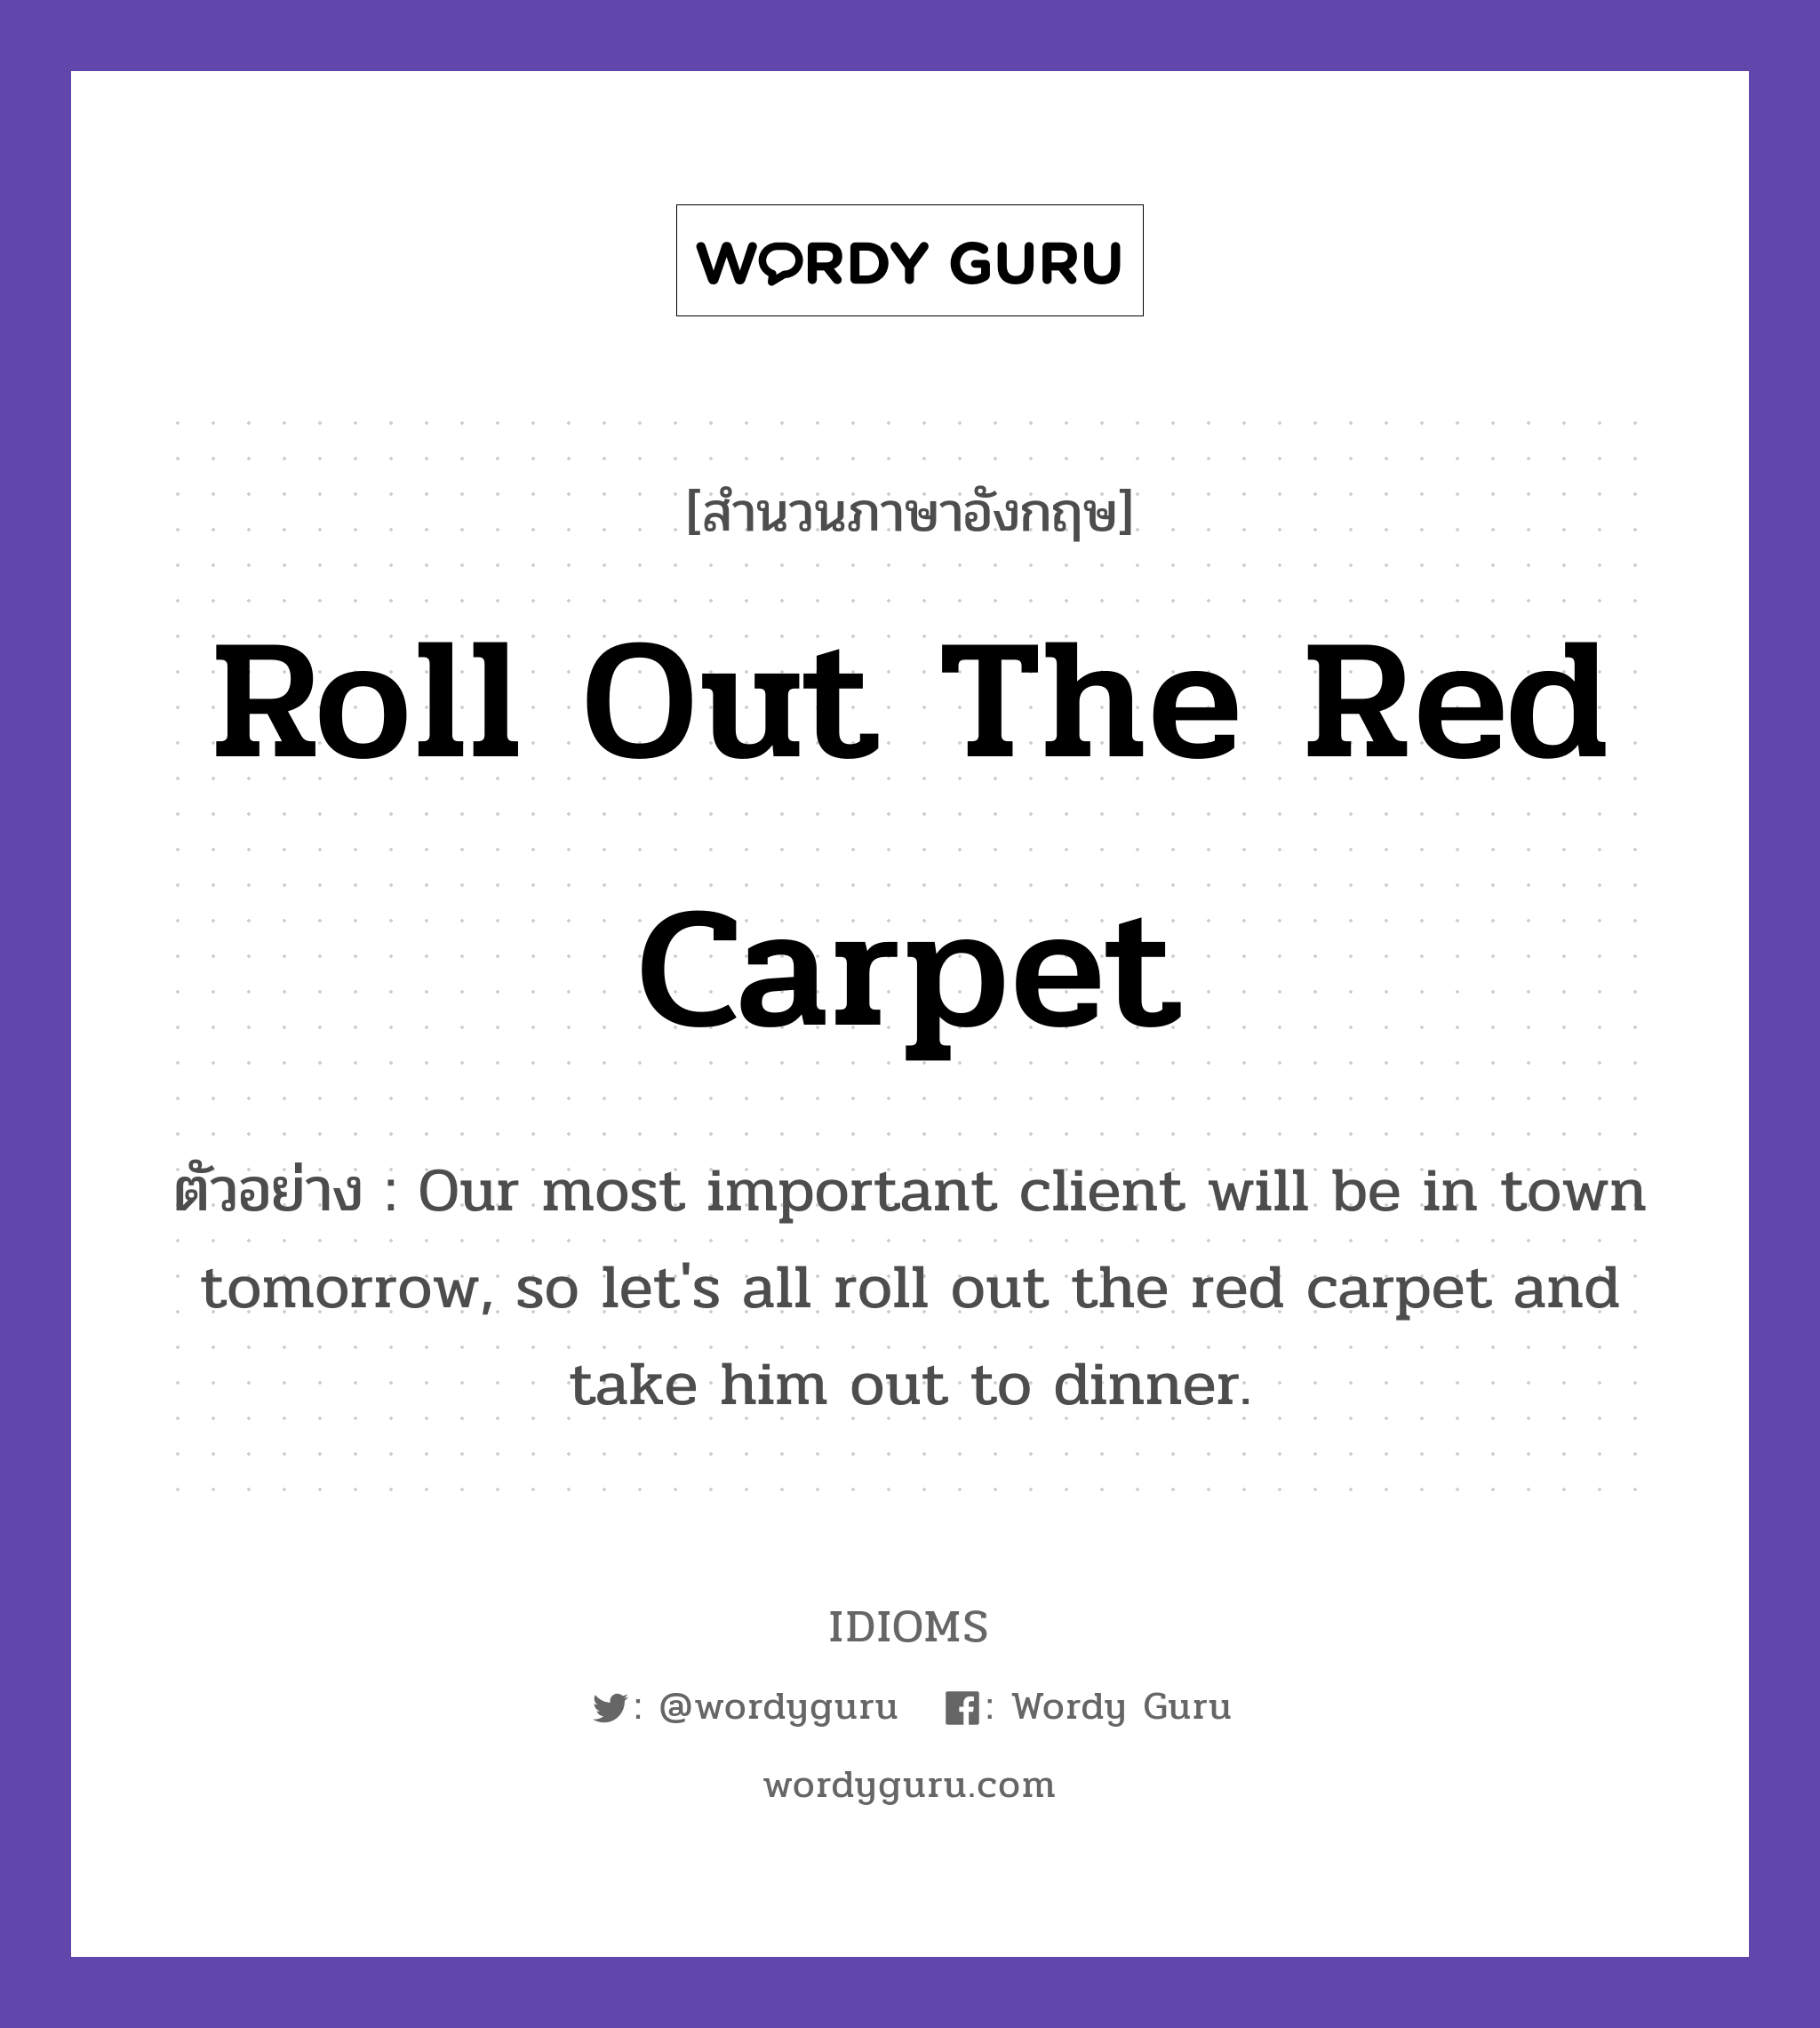 Roll Out The Red Carpet แปลว่า?, สำนวนภาษาอังกฤษ Roll Out The Red Carpet ตัวอย่าง Our most important client will be in town tomorrow, so let's all roll out the red carpet and take him out to dinner.